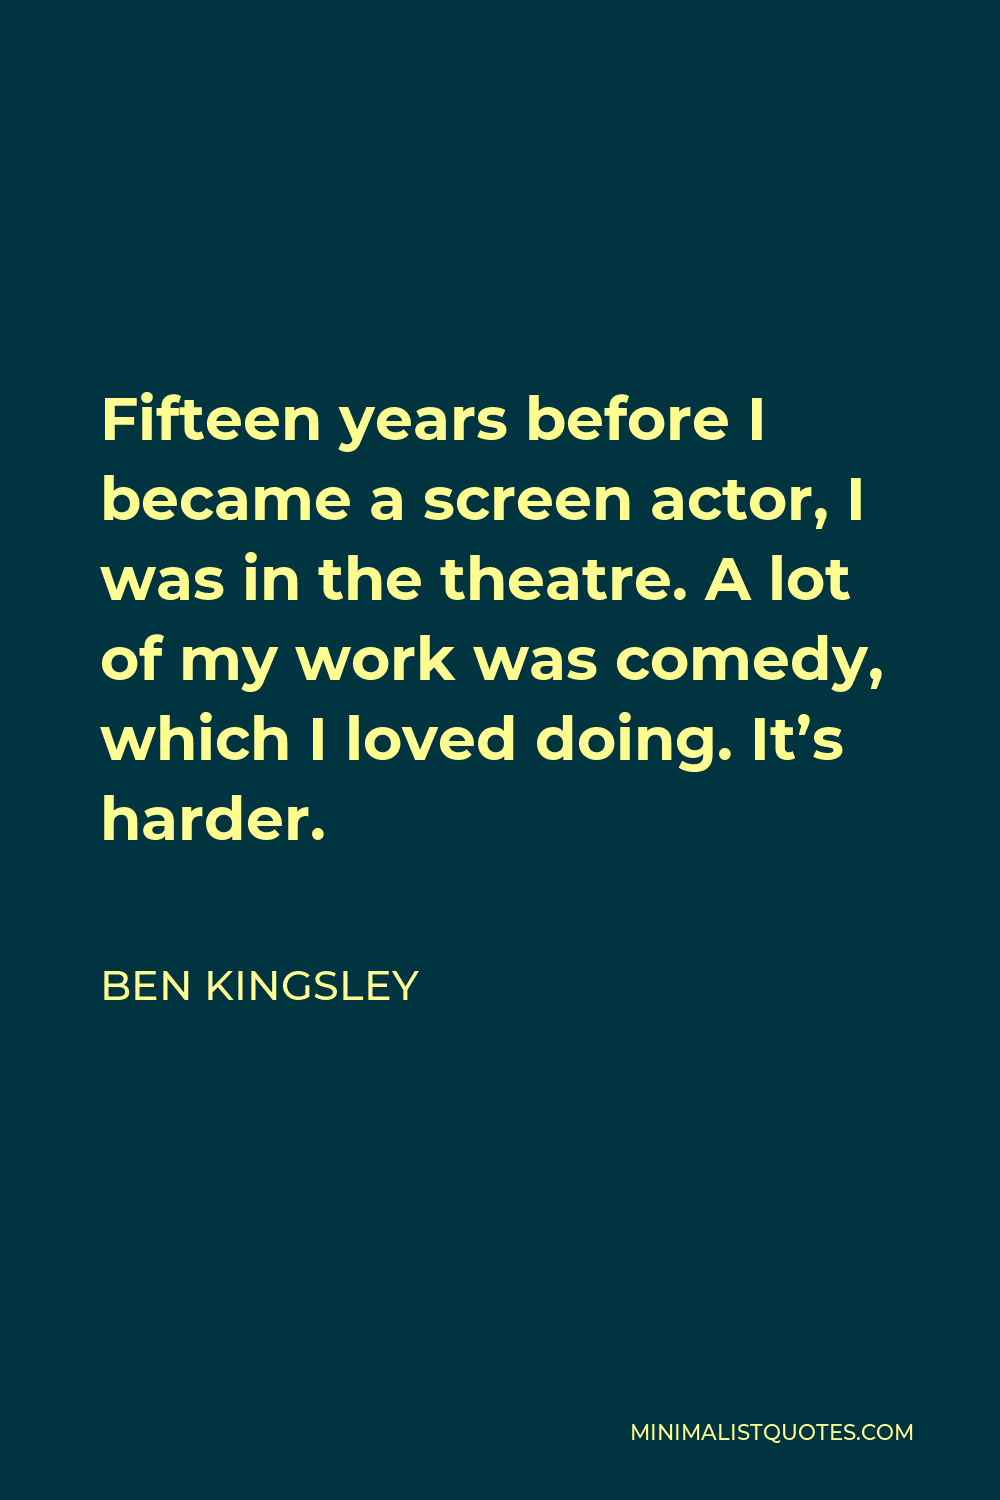 Ben Kingsley Quote - Fifteen years before I became a screen actor, I was in the theatre. A lot of my work was comedy, which I loved doing. It’s harder.